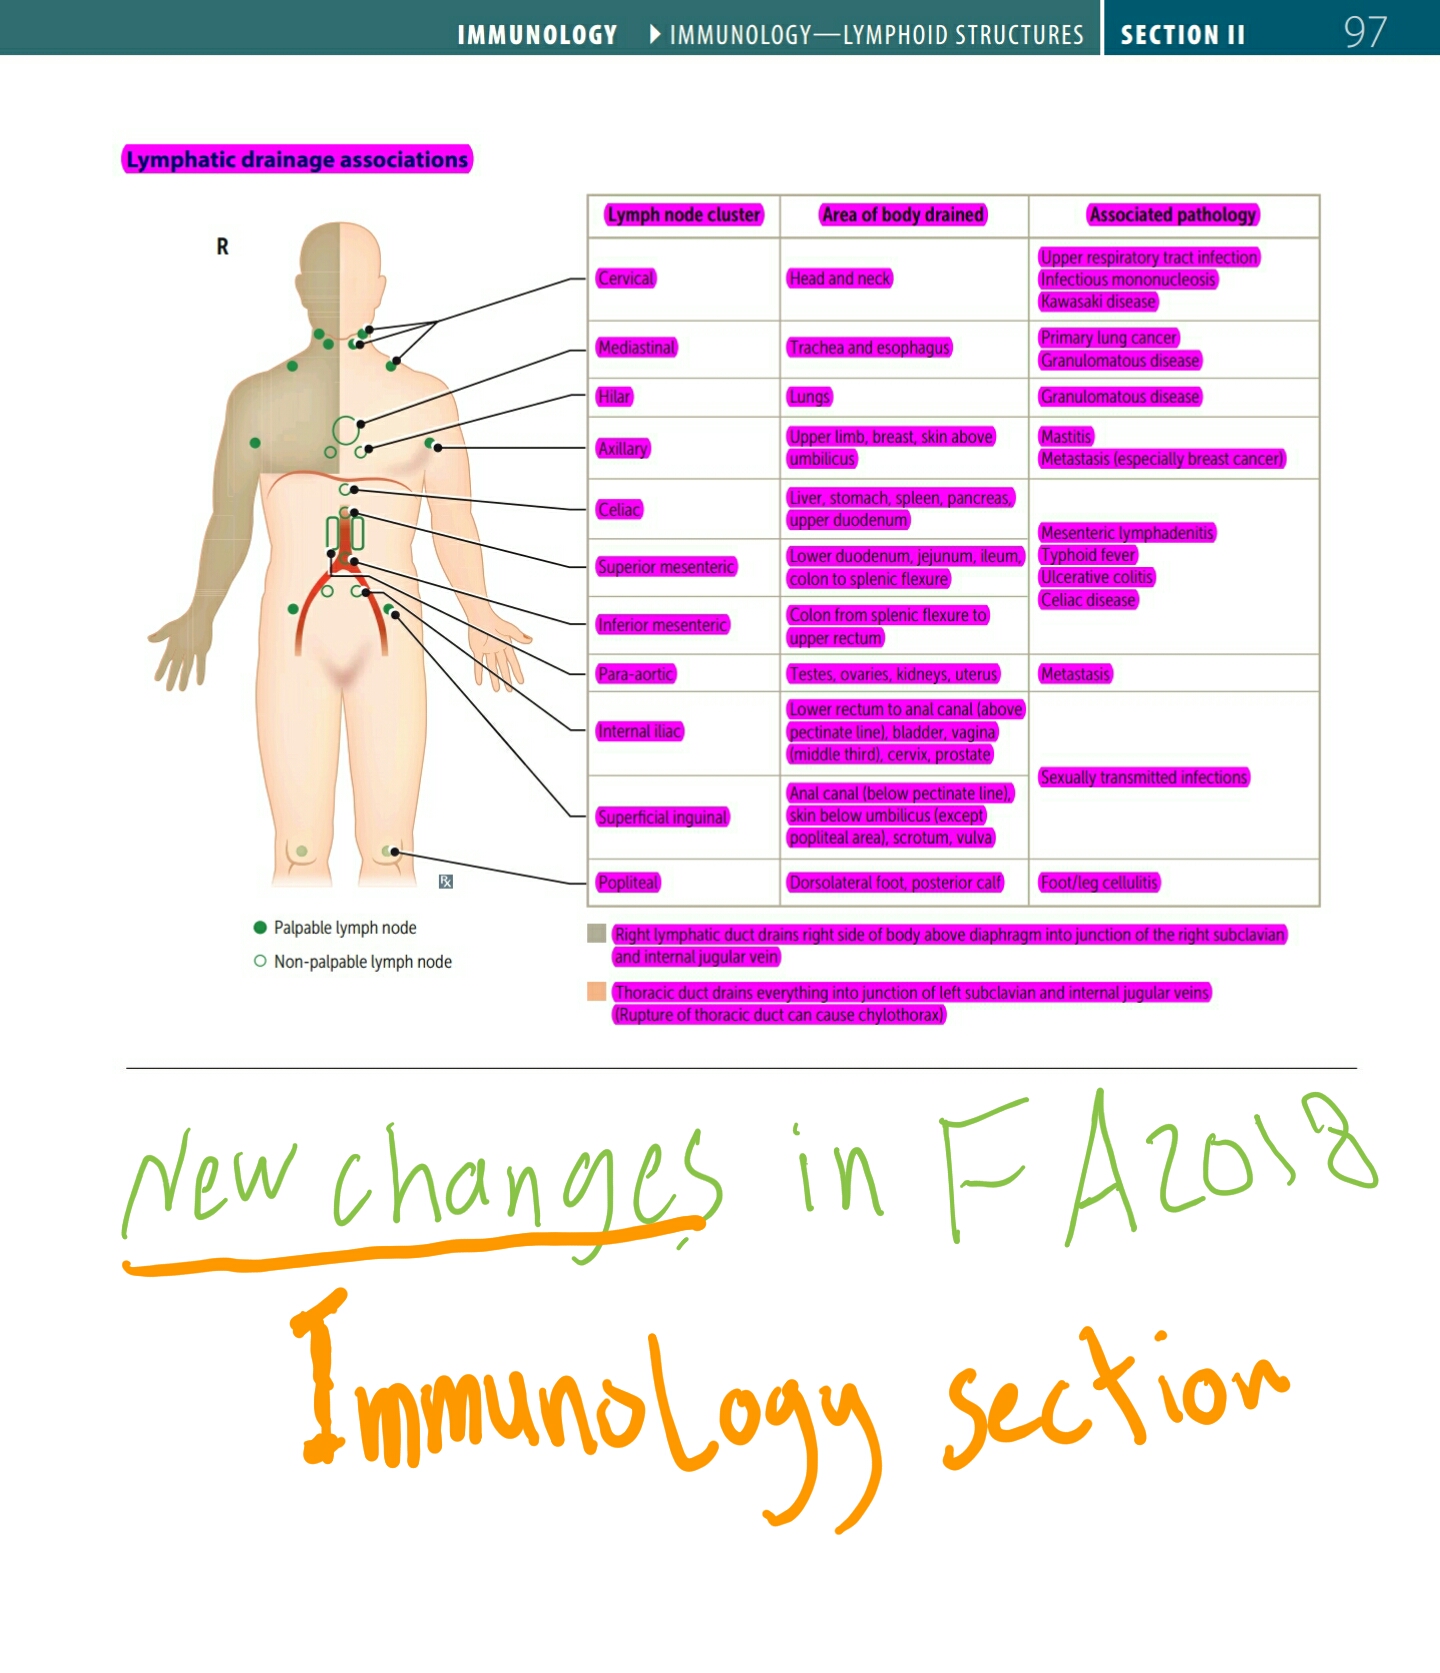 New Changes In First Aid Gor USMLE Step 1 2018 Edition In Immunology Chapter